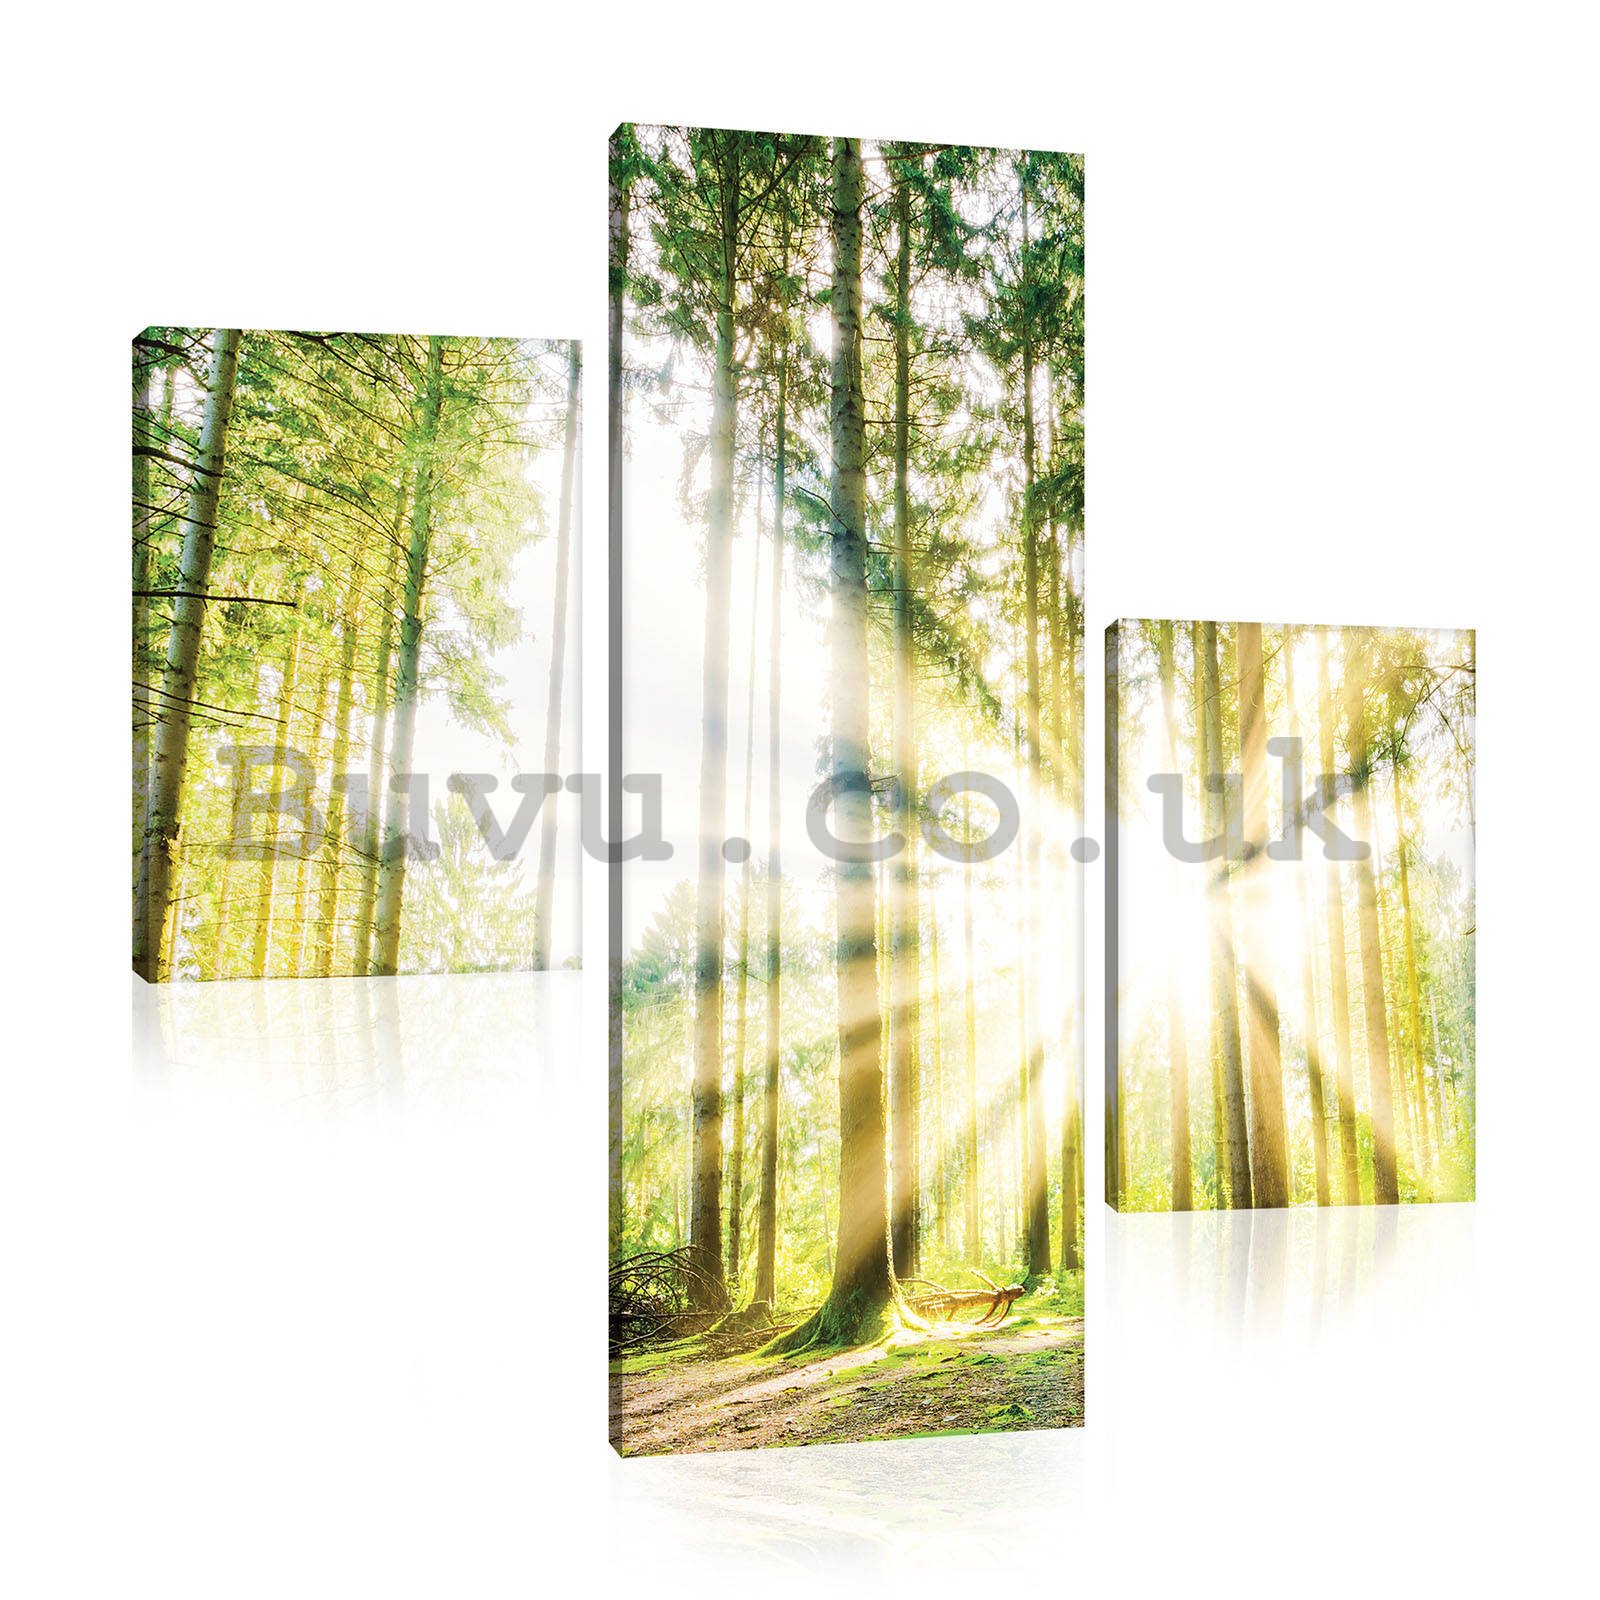 Painting on canvas: Sun in the Forest (4) - set 1pc 80x30 cm and 2pc 37,5x24,8 cm